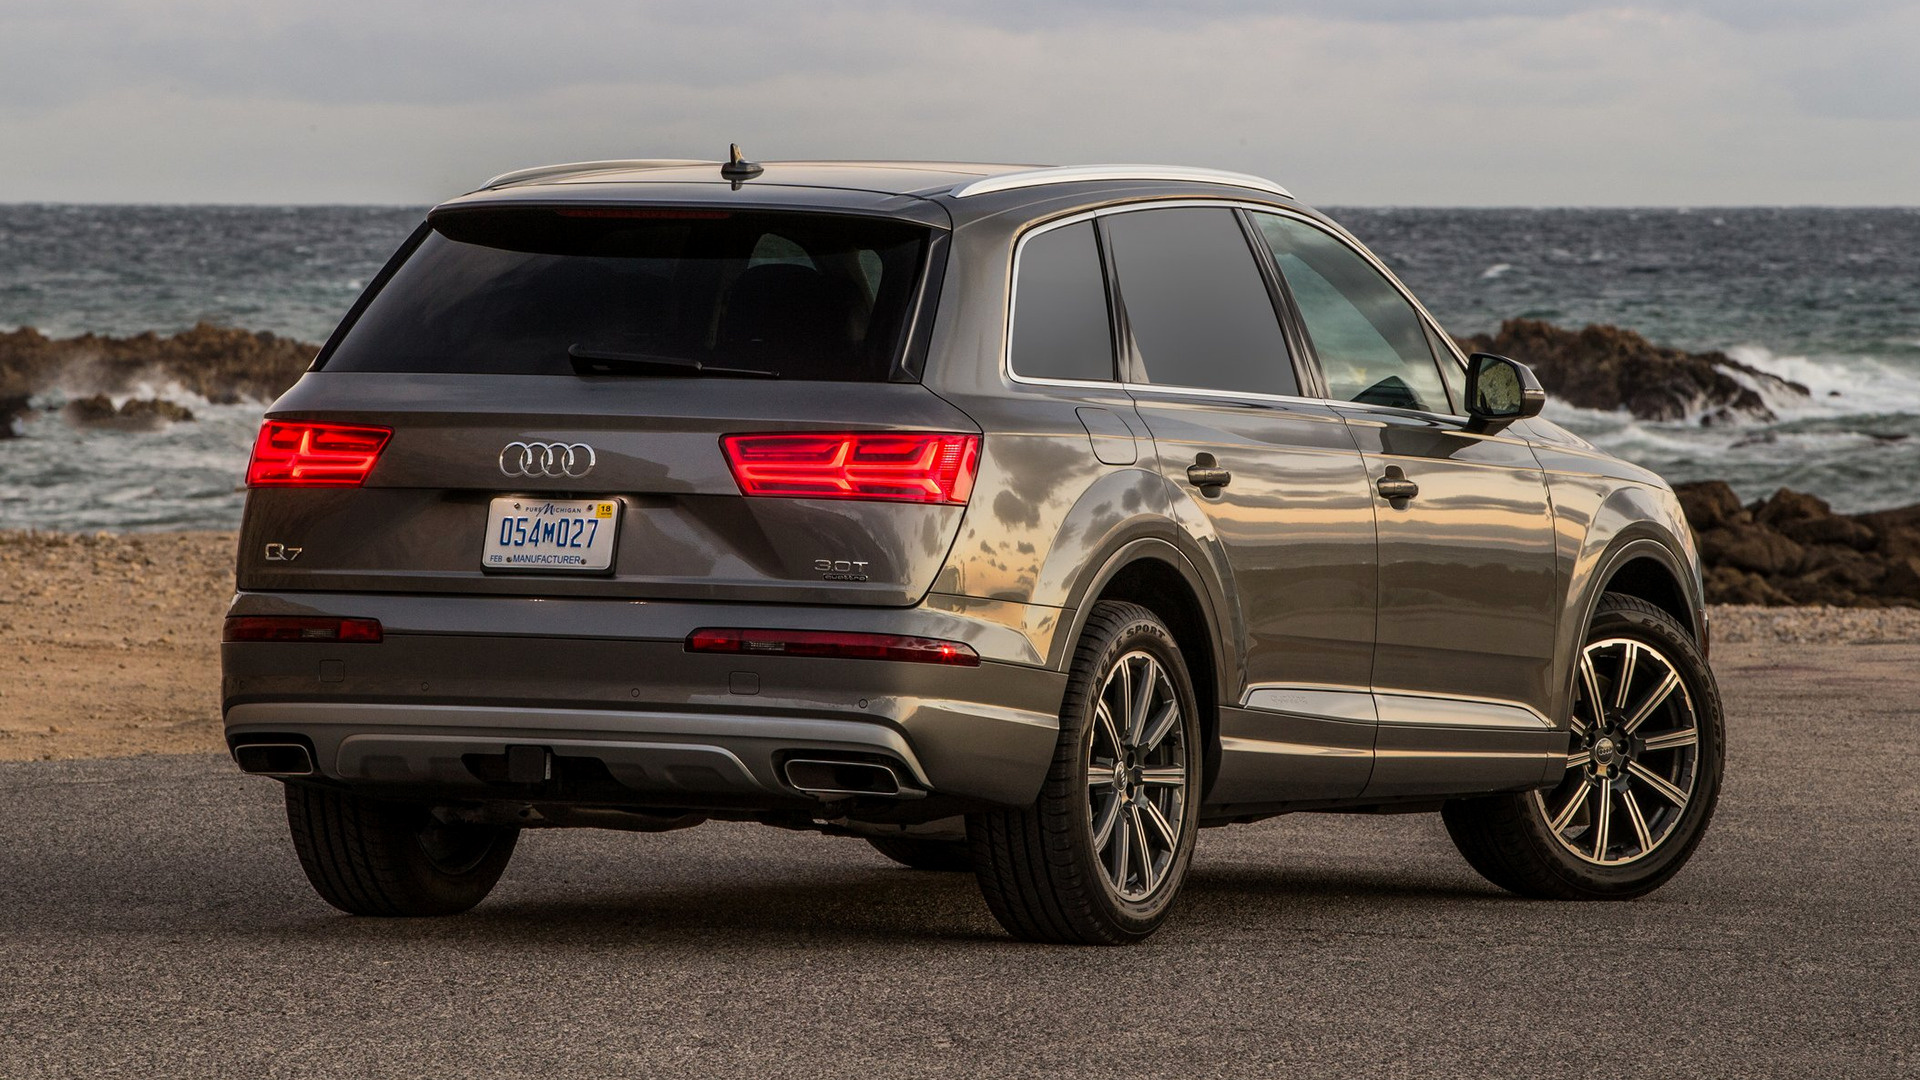 2017 Audi Q7 (US) - Wallpapers and HD Images | Car Pixel